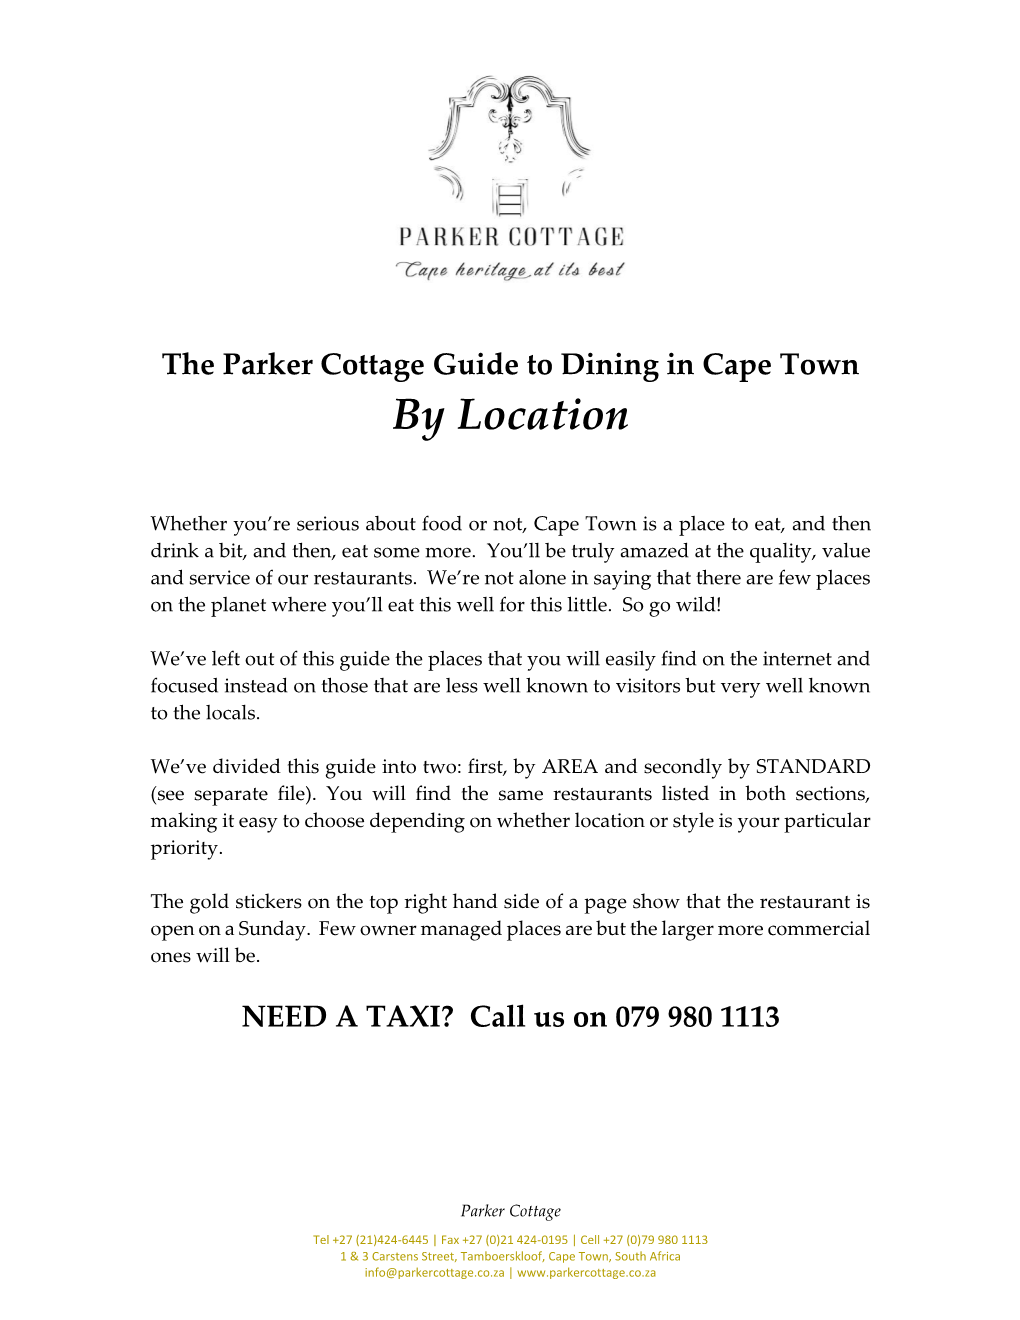 Parker Cottage's Guide to Dining out in Cape Town by Location